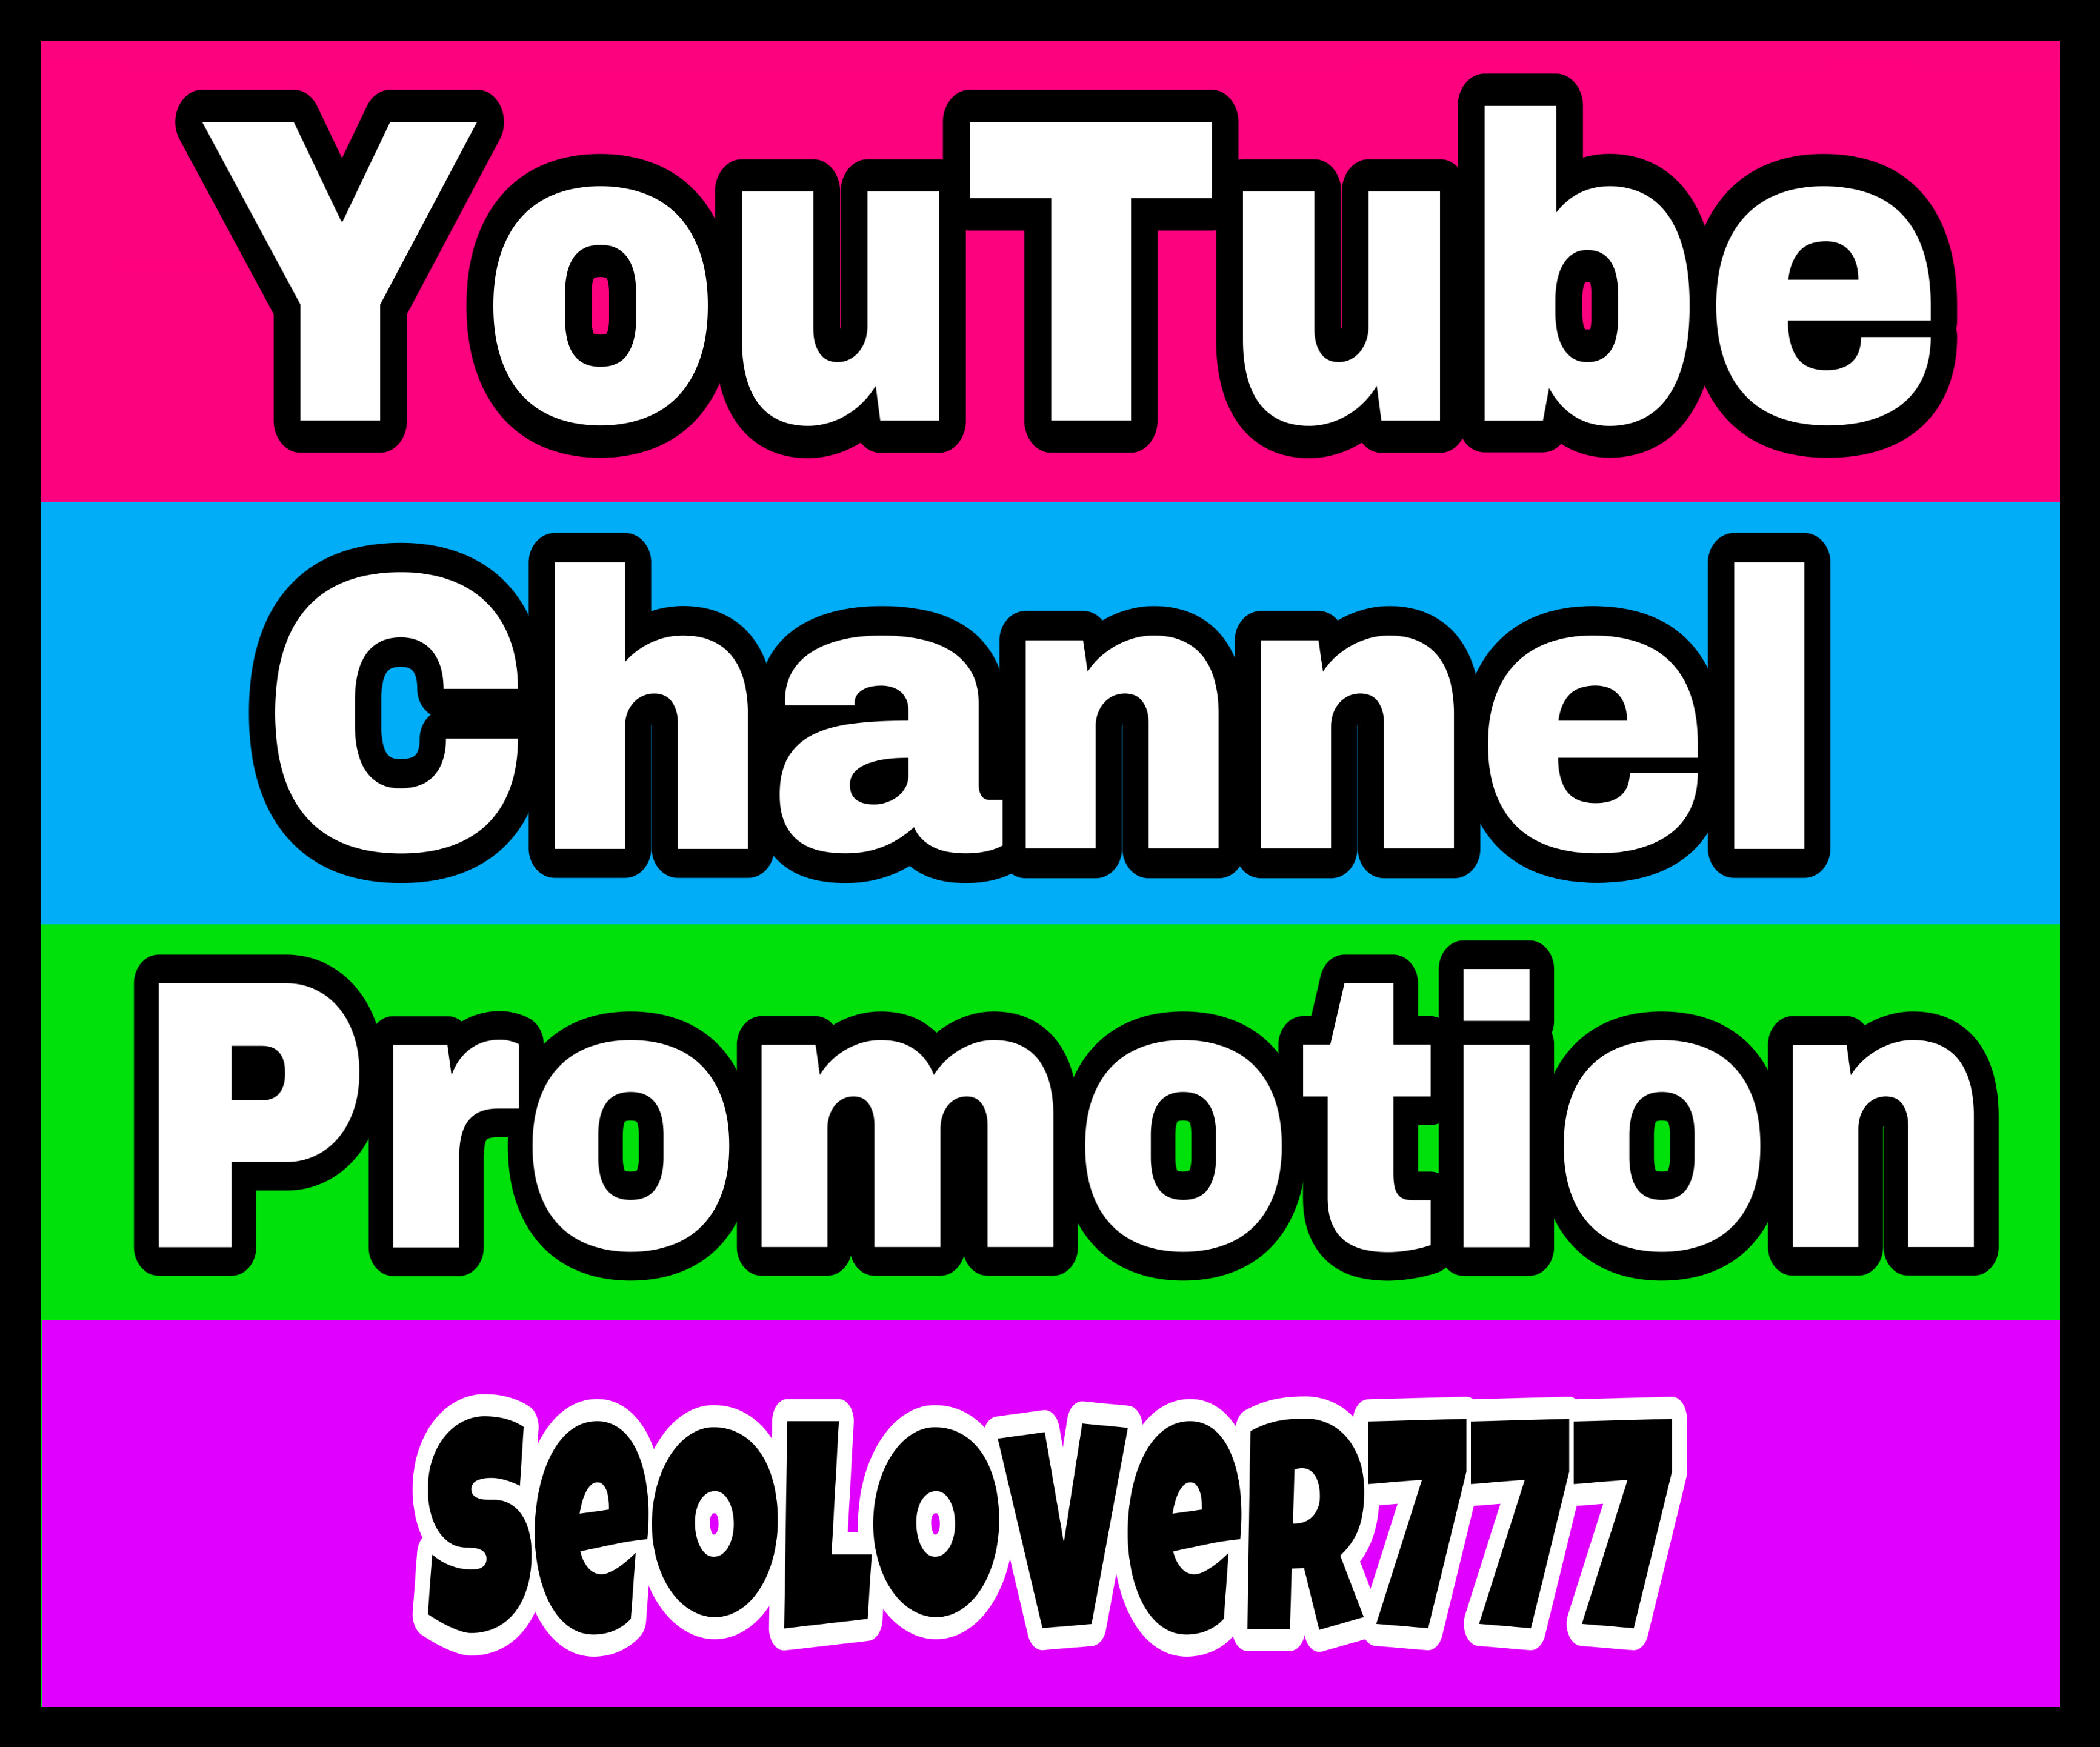 YouTube organic promotion with real, fast & high quality